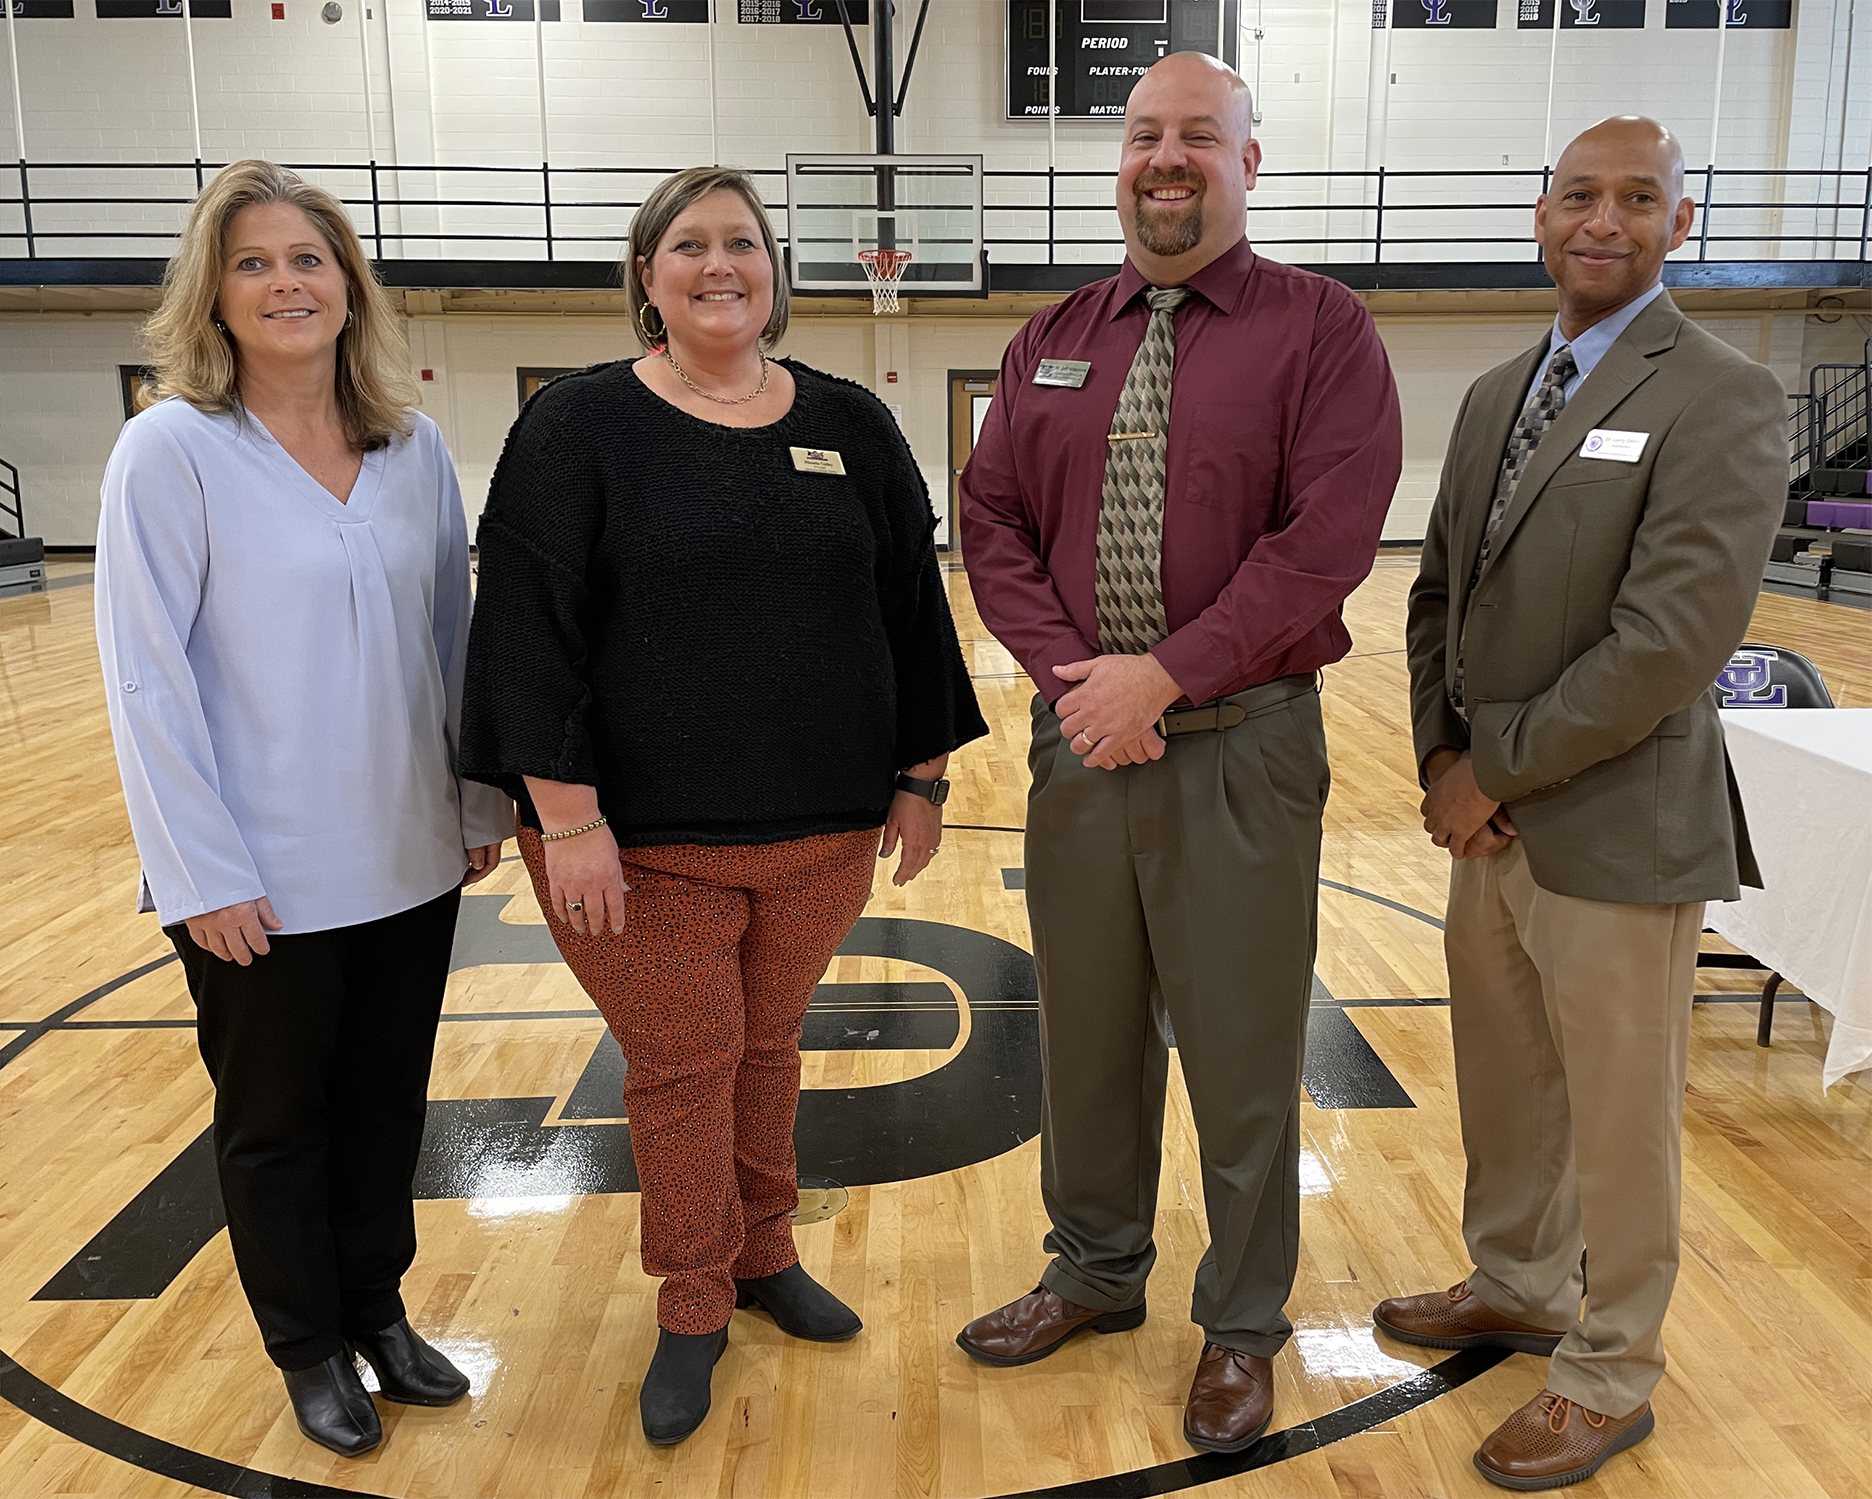  Local News: UPSON LEE MIDDLE SCHOOL ASSISTANT PRINCIPAL JEFF  WHEELESS RECEIVES OUTSTANDING AP AWARD